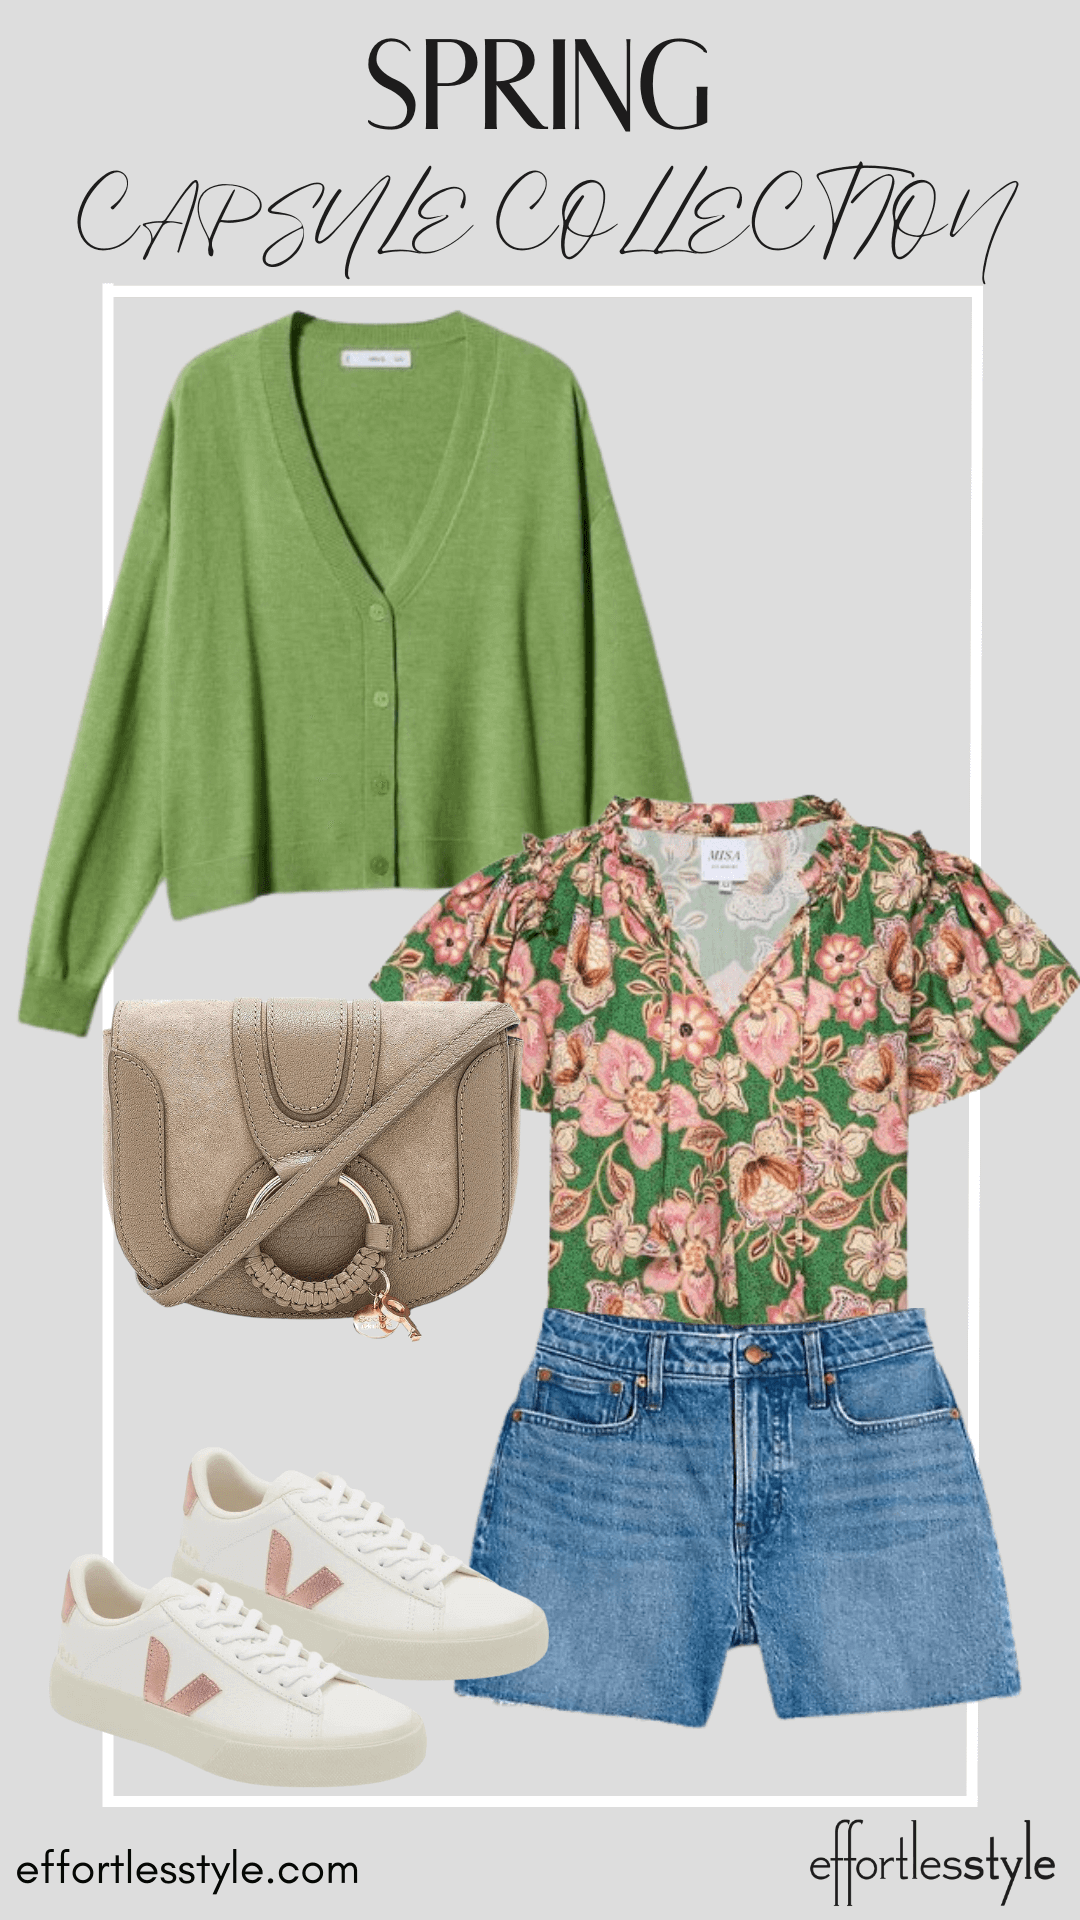 How To Wear Our Spring Capsule Wardrobe - Part 1 Matching Set Top & Cardigan & Denim Shorts how to wear denim shorts in your 40s how to style denim shorts in your 30s and 40s how to wear the color green the color green trend